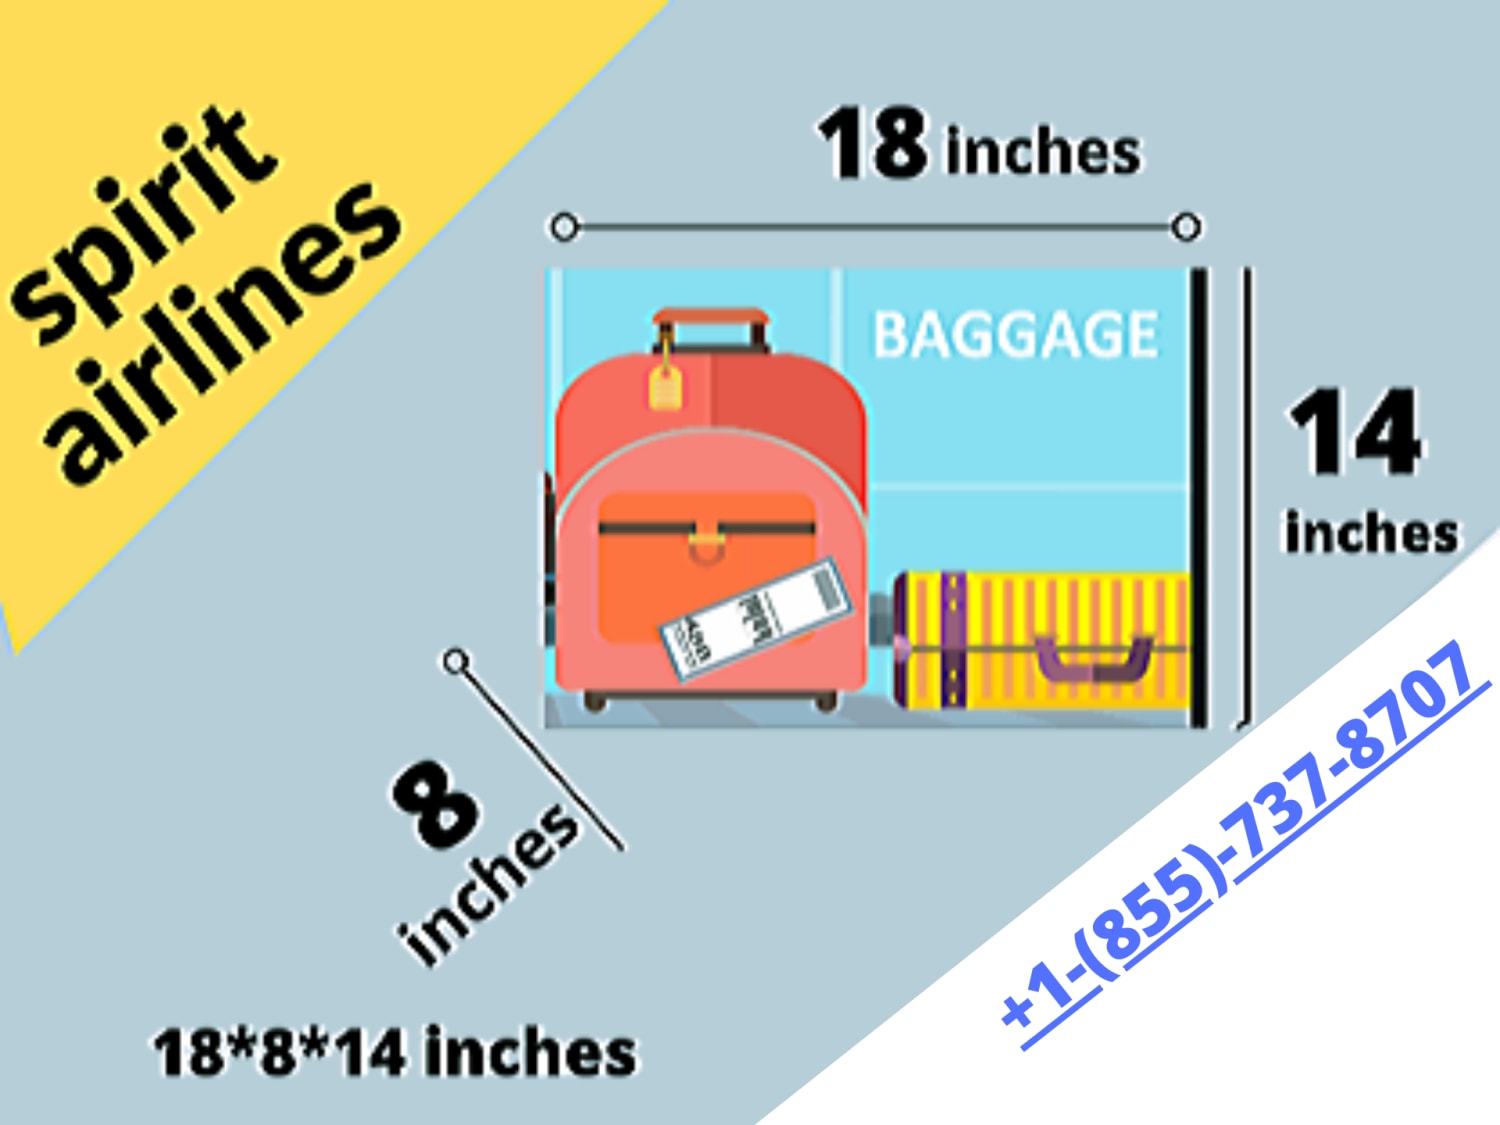 Spirit Airlines Baggage Fees & Policy 2020 - What's New?